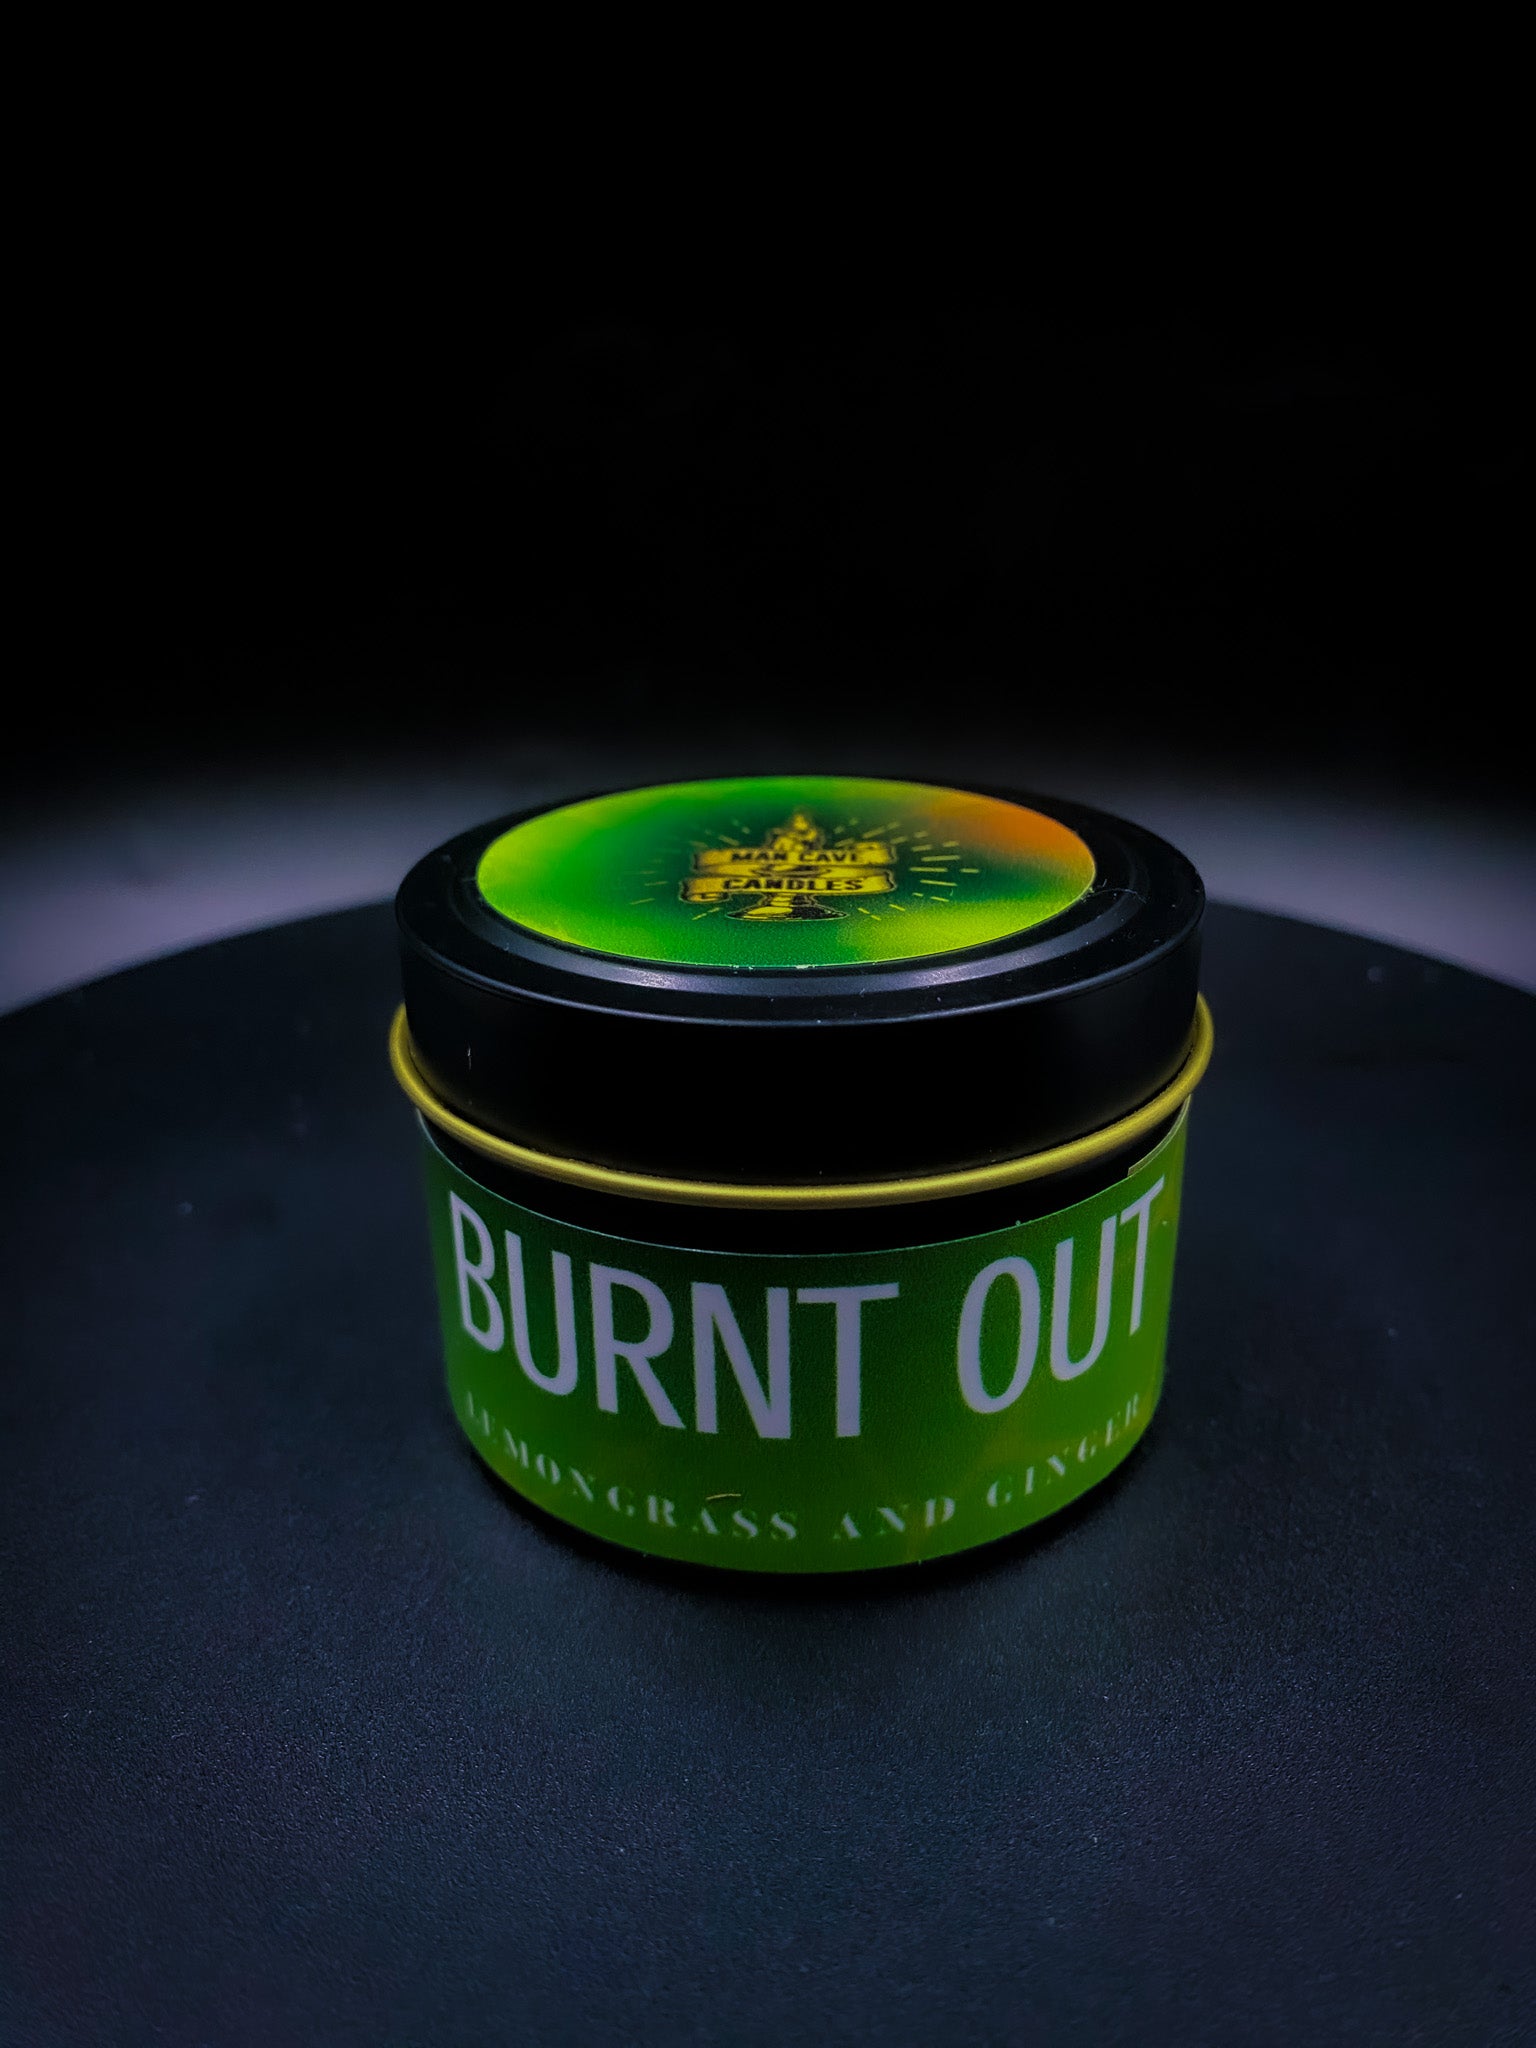 Burnt Out - Lemongrass/Ginger Scented Man Cave Candle